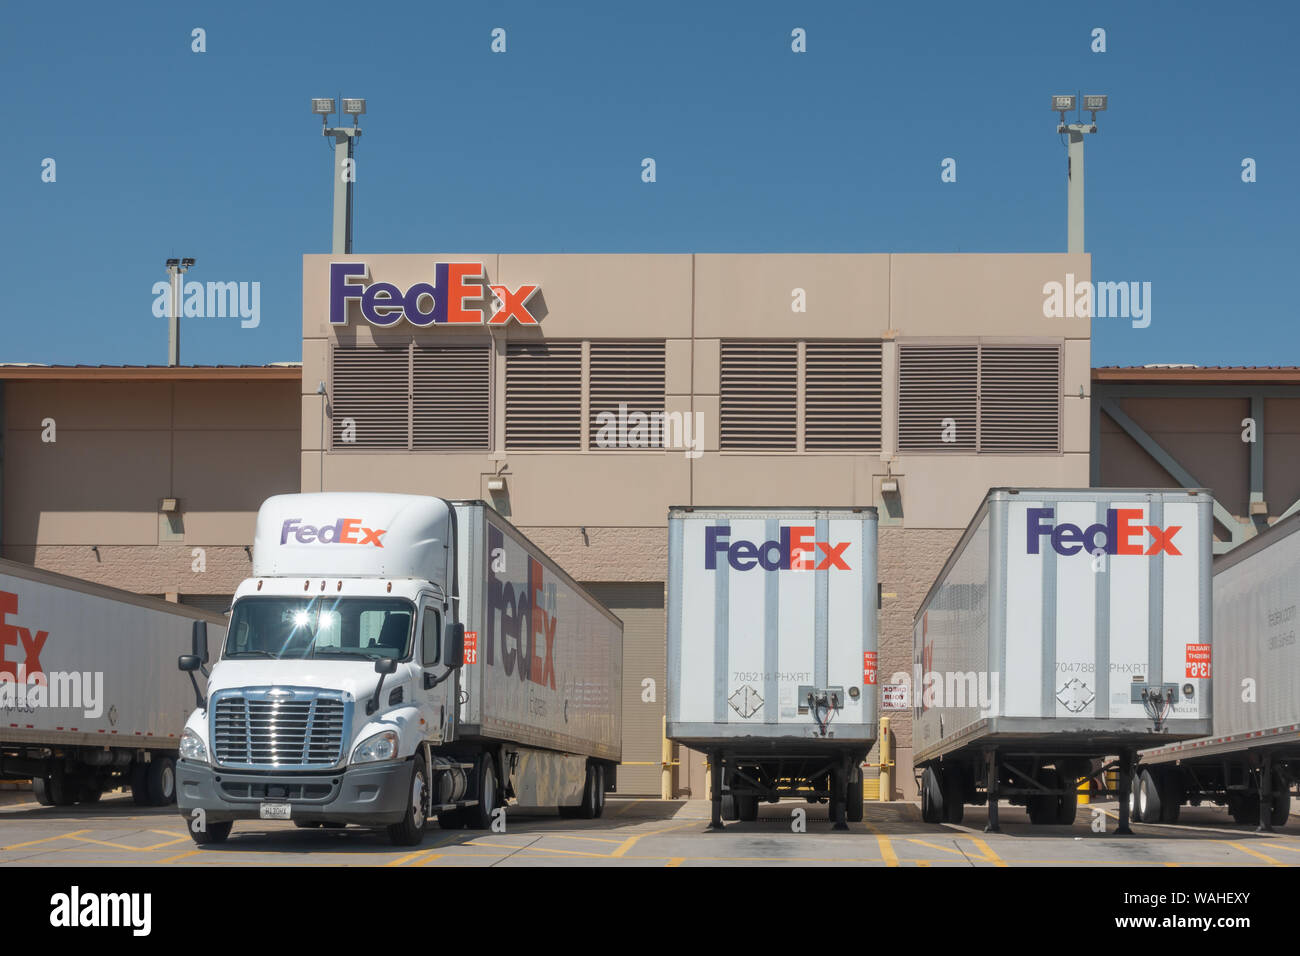 Phoenix,Az/USA - 8.16.19: Large FedEx delivery trucks at warehouse facility at SkyHarbor Airport in Phoenix.  FedEx is an American multinational couri Stock Photo